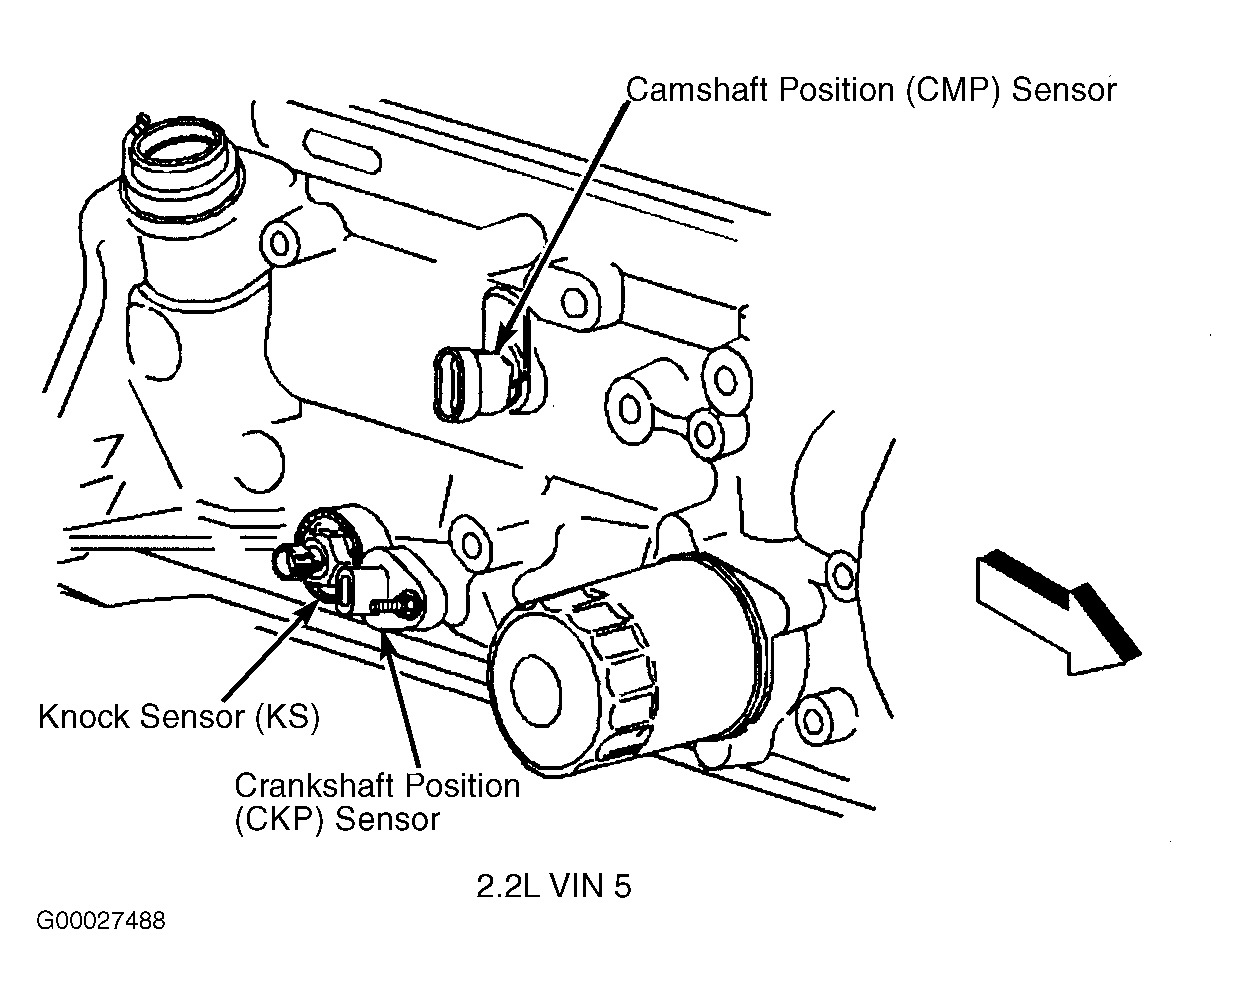 GMC Sonoma 2003 - Component Locations -  Right Side Of Engine (2.2L VIN 5)